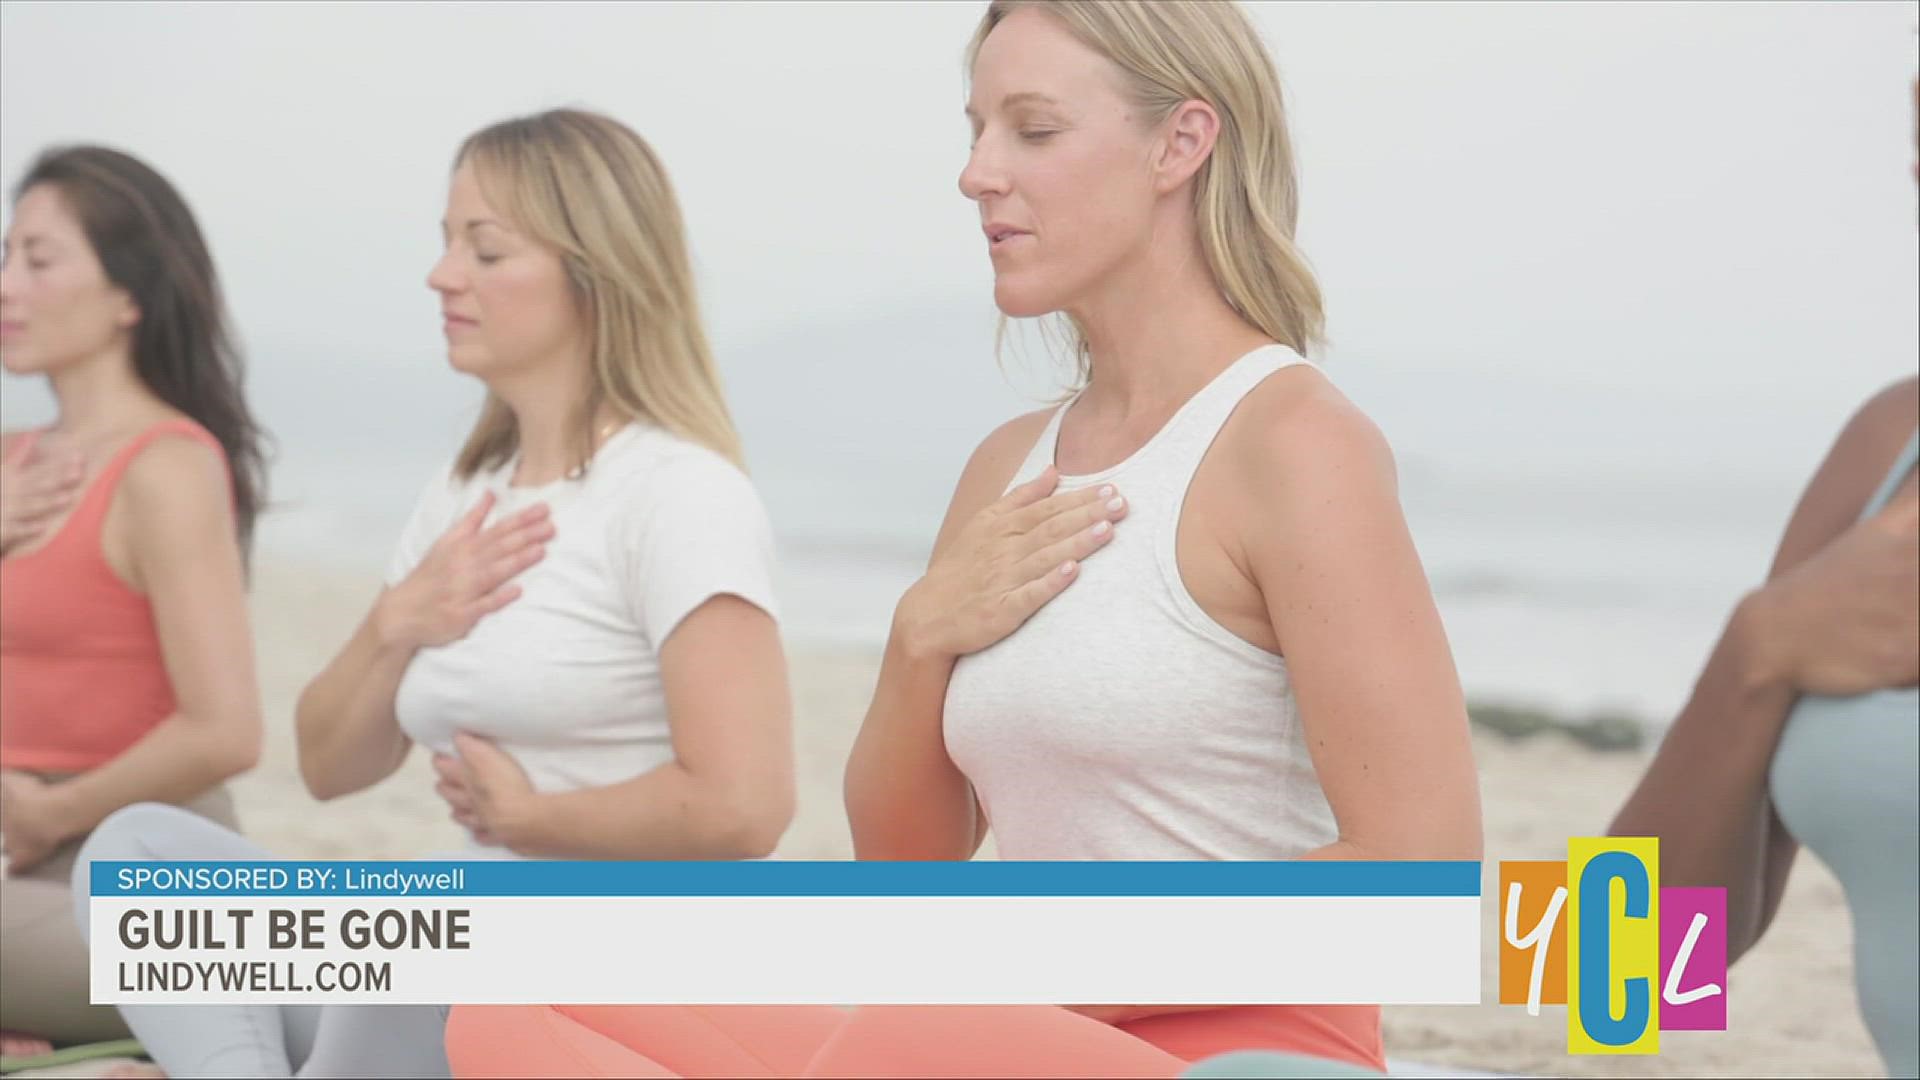 Don't know where to start your health journey? See how you can implement the practice of Pilates into your life. This segment is paid by Lindywell.